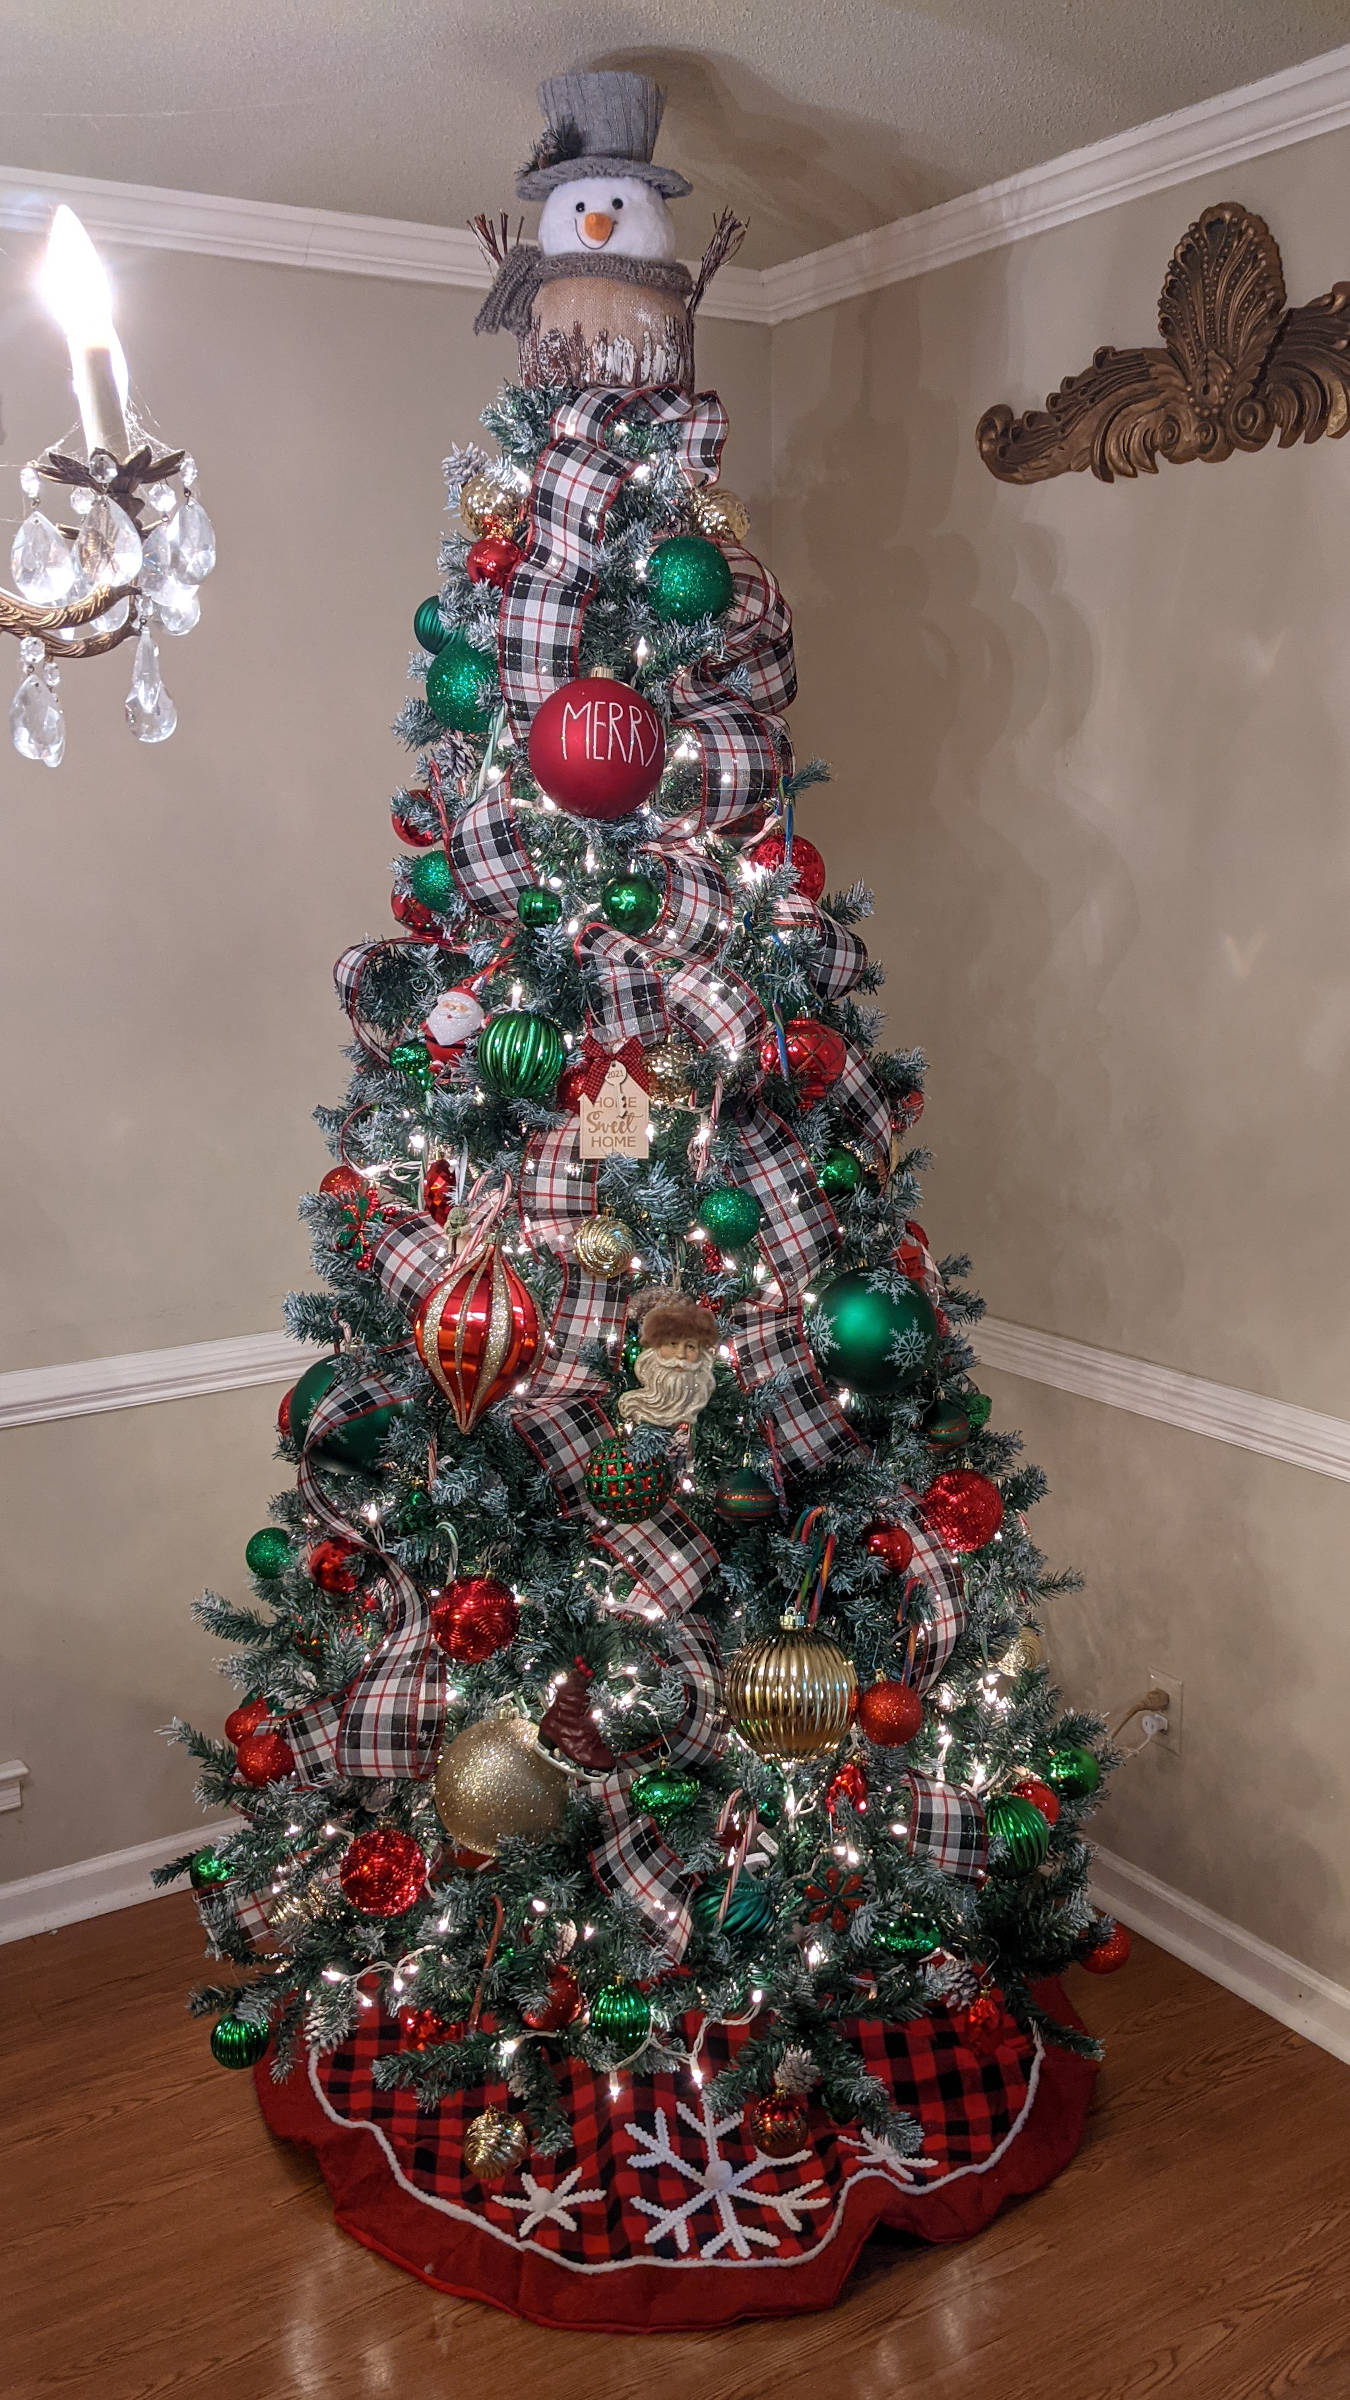 Fully decorated Christmas tree with red, green, and gold ornaments.